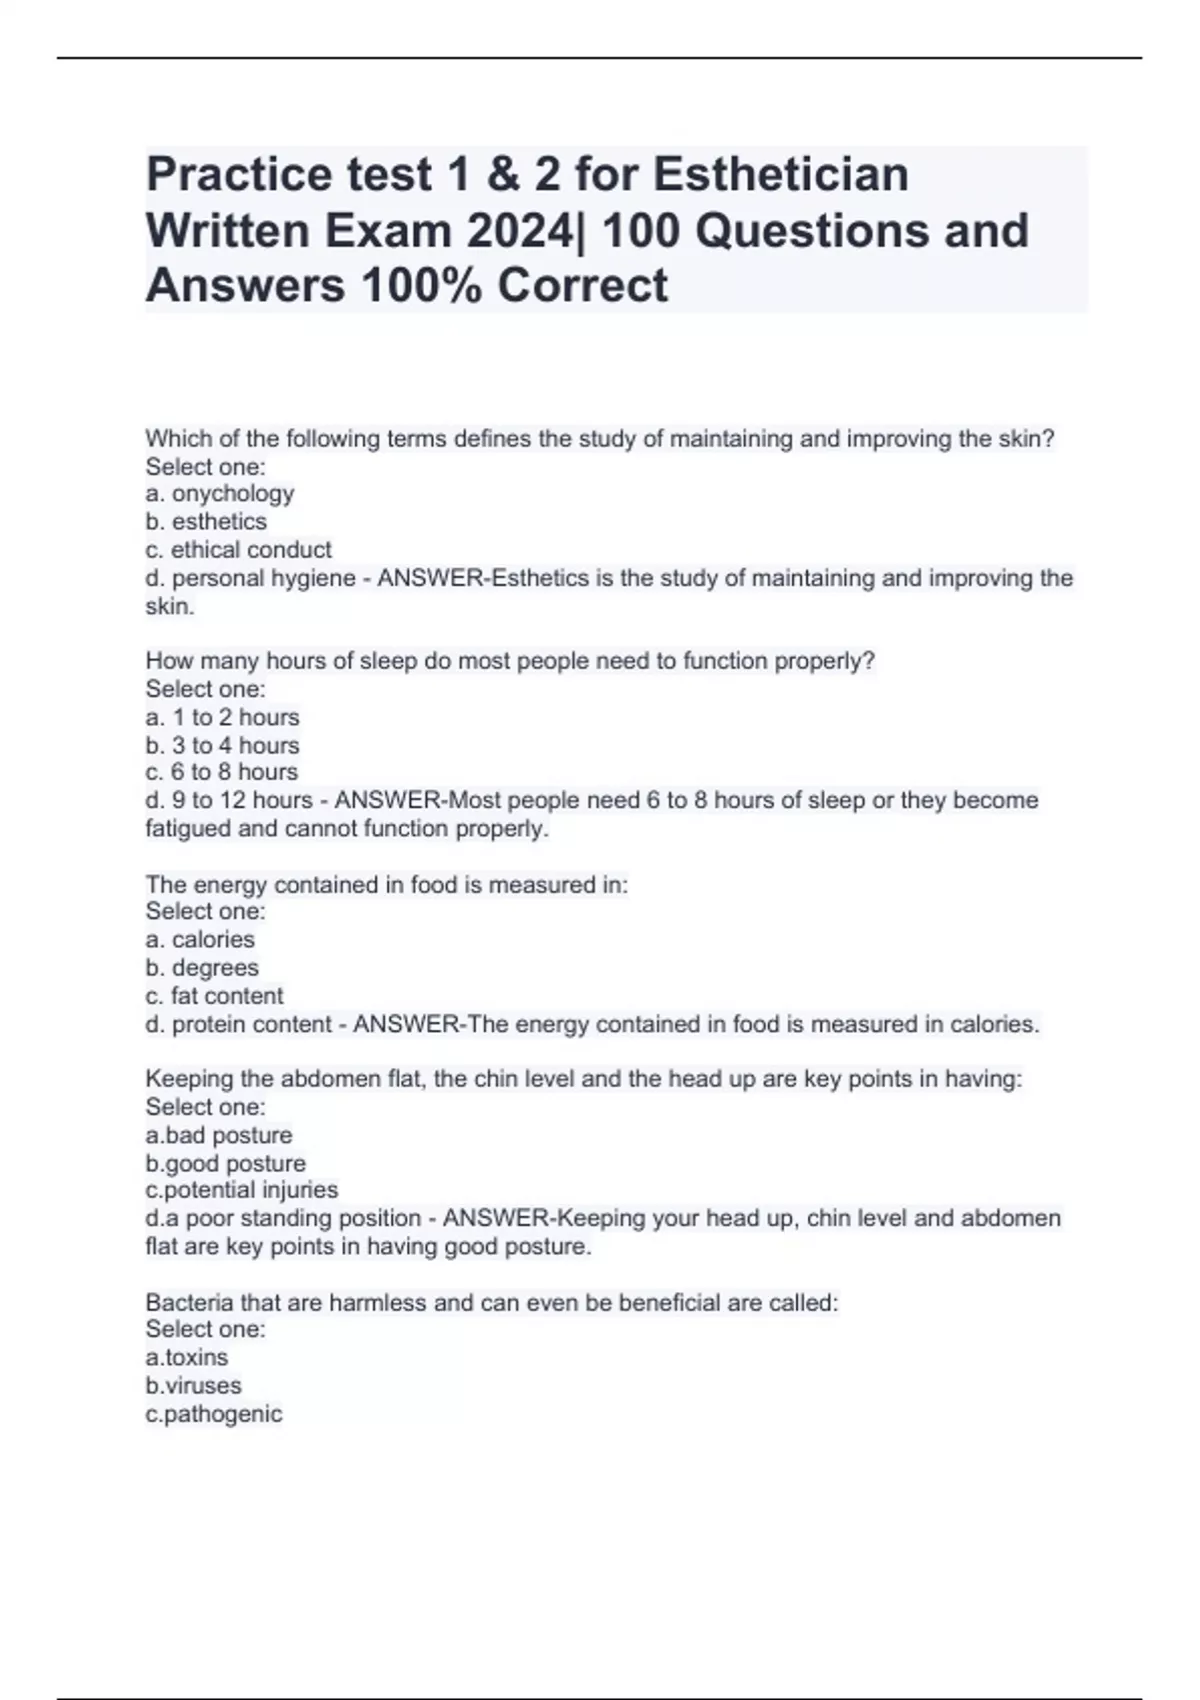 Practice test 1 & 2 for Esthetician Written Exam 2024 100 Questions and Answers 100 Correct